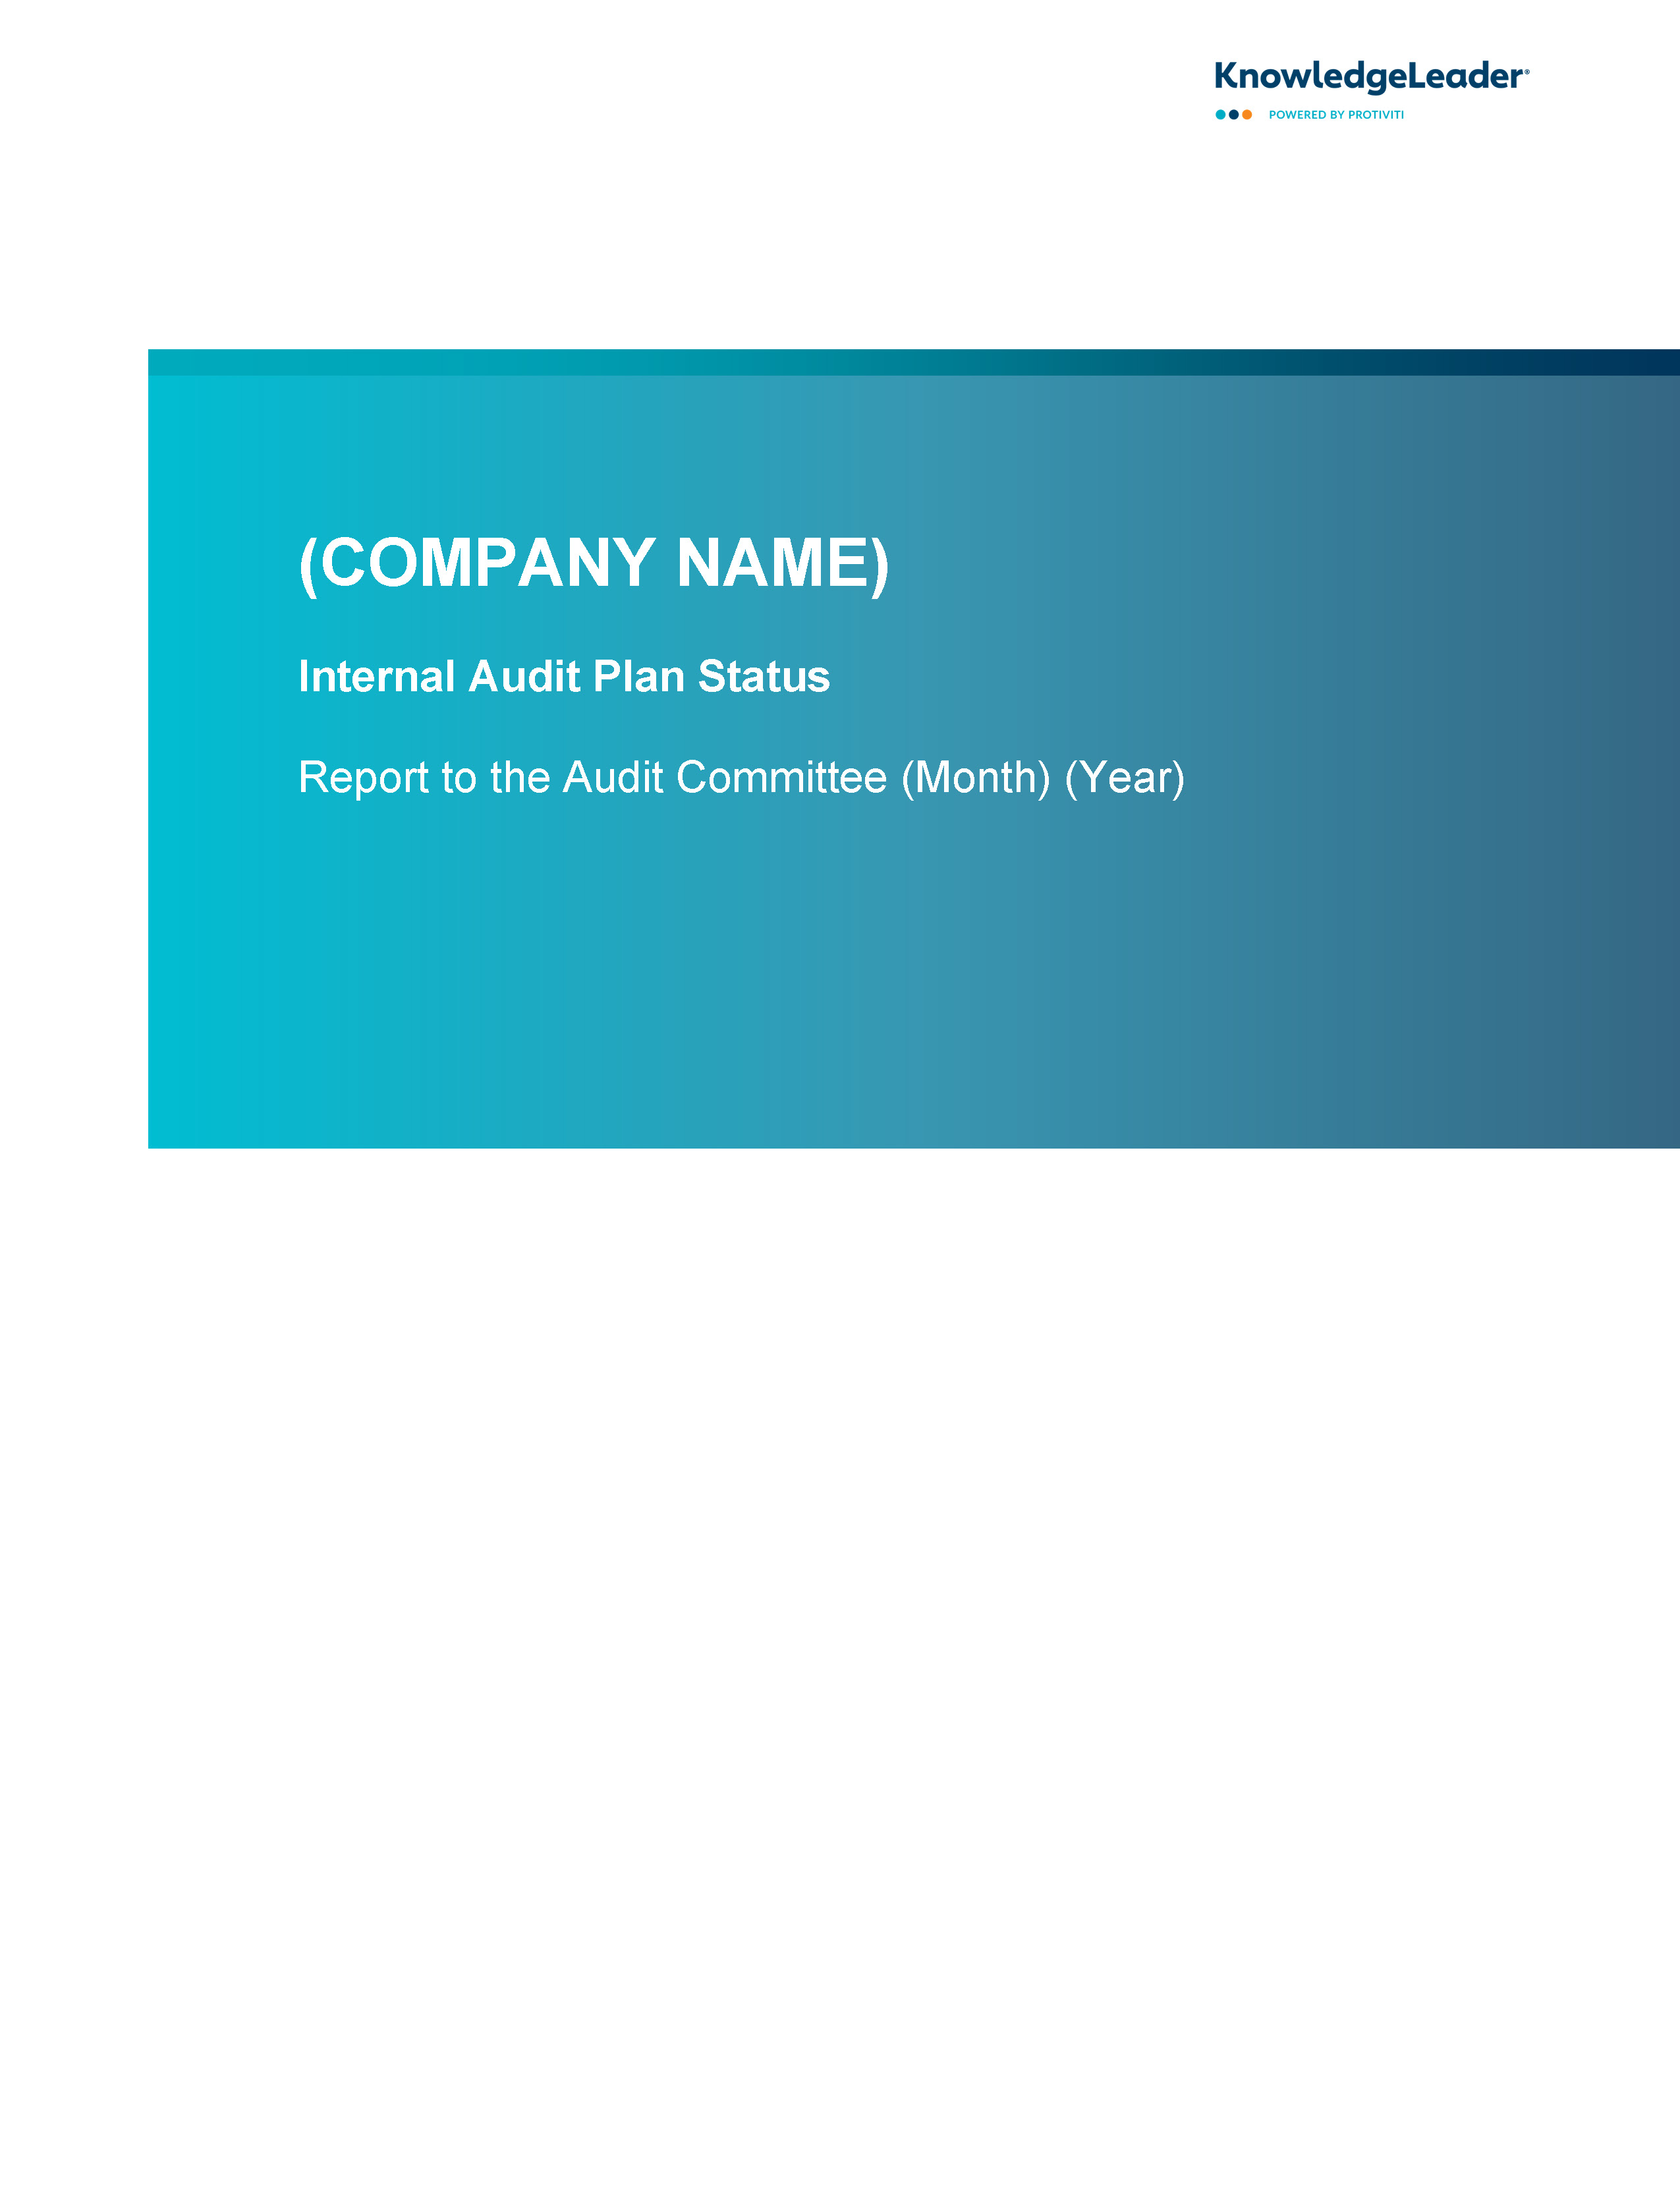 Screenshot of the first page of Internal Audit Plan Status – Report to the Audit Committee